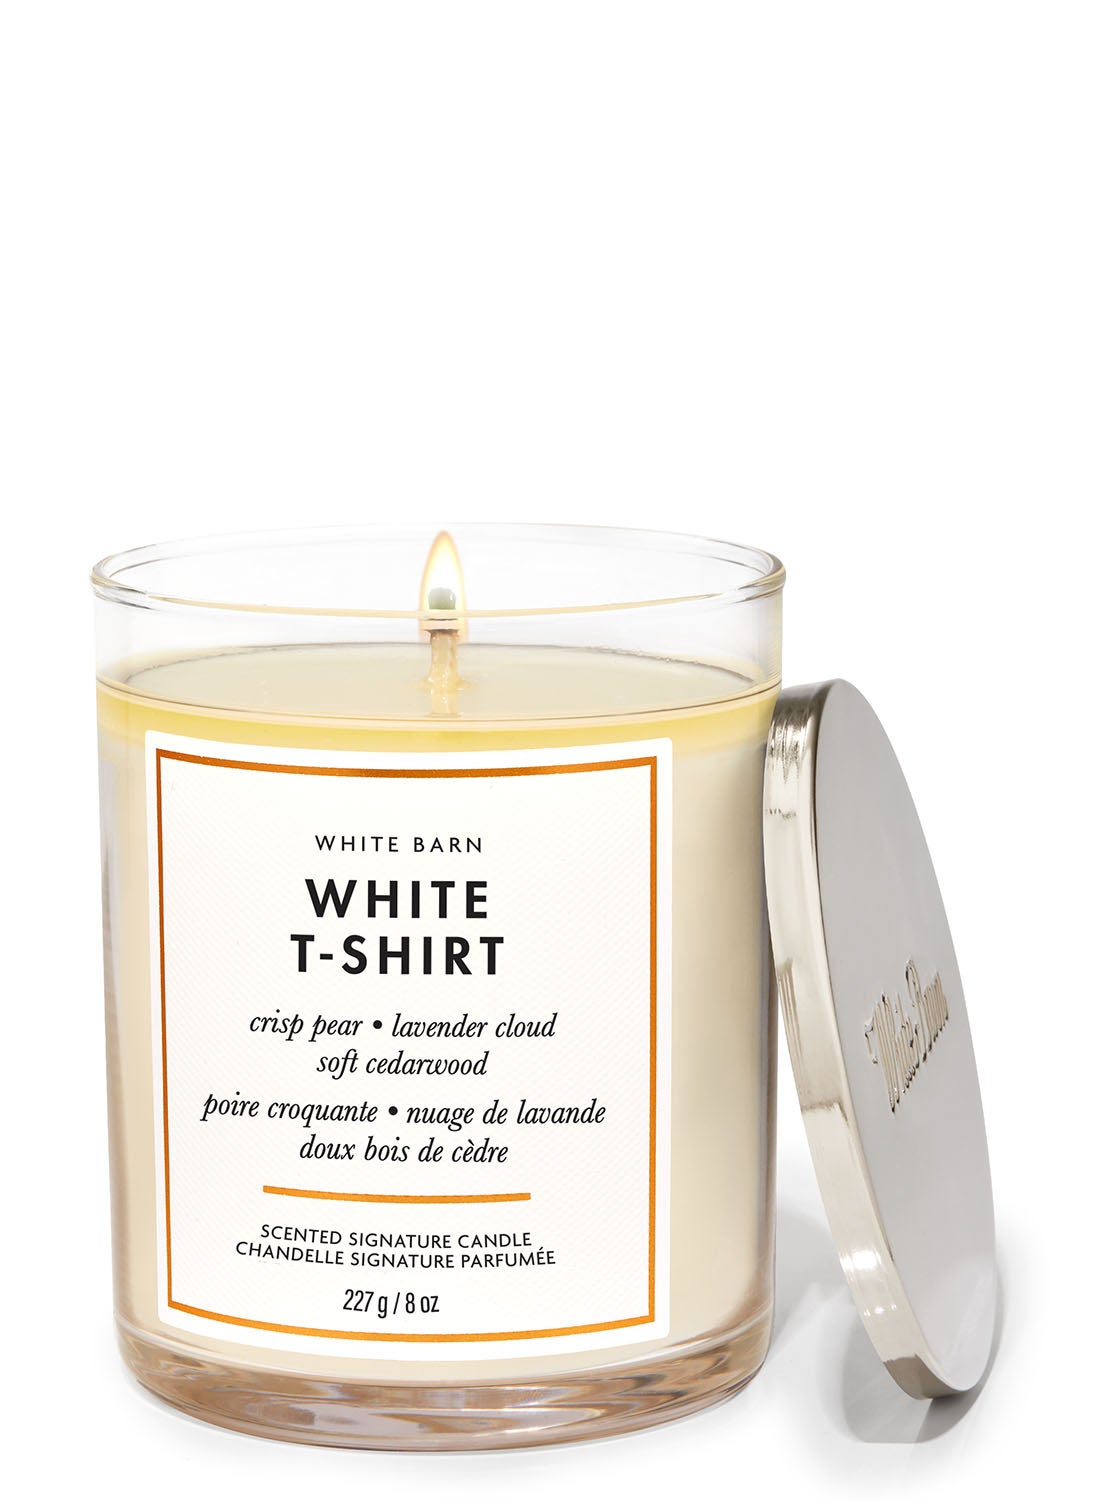 White T-Shirt Signature Single Wick Candle | Bath and Body Works